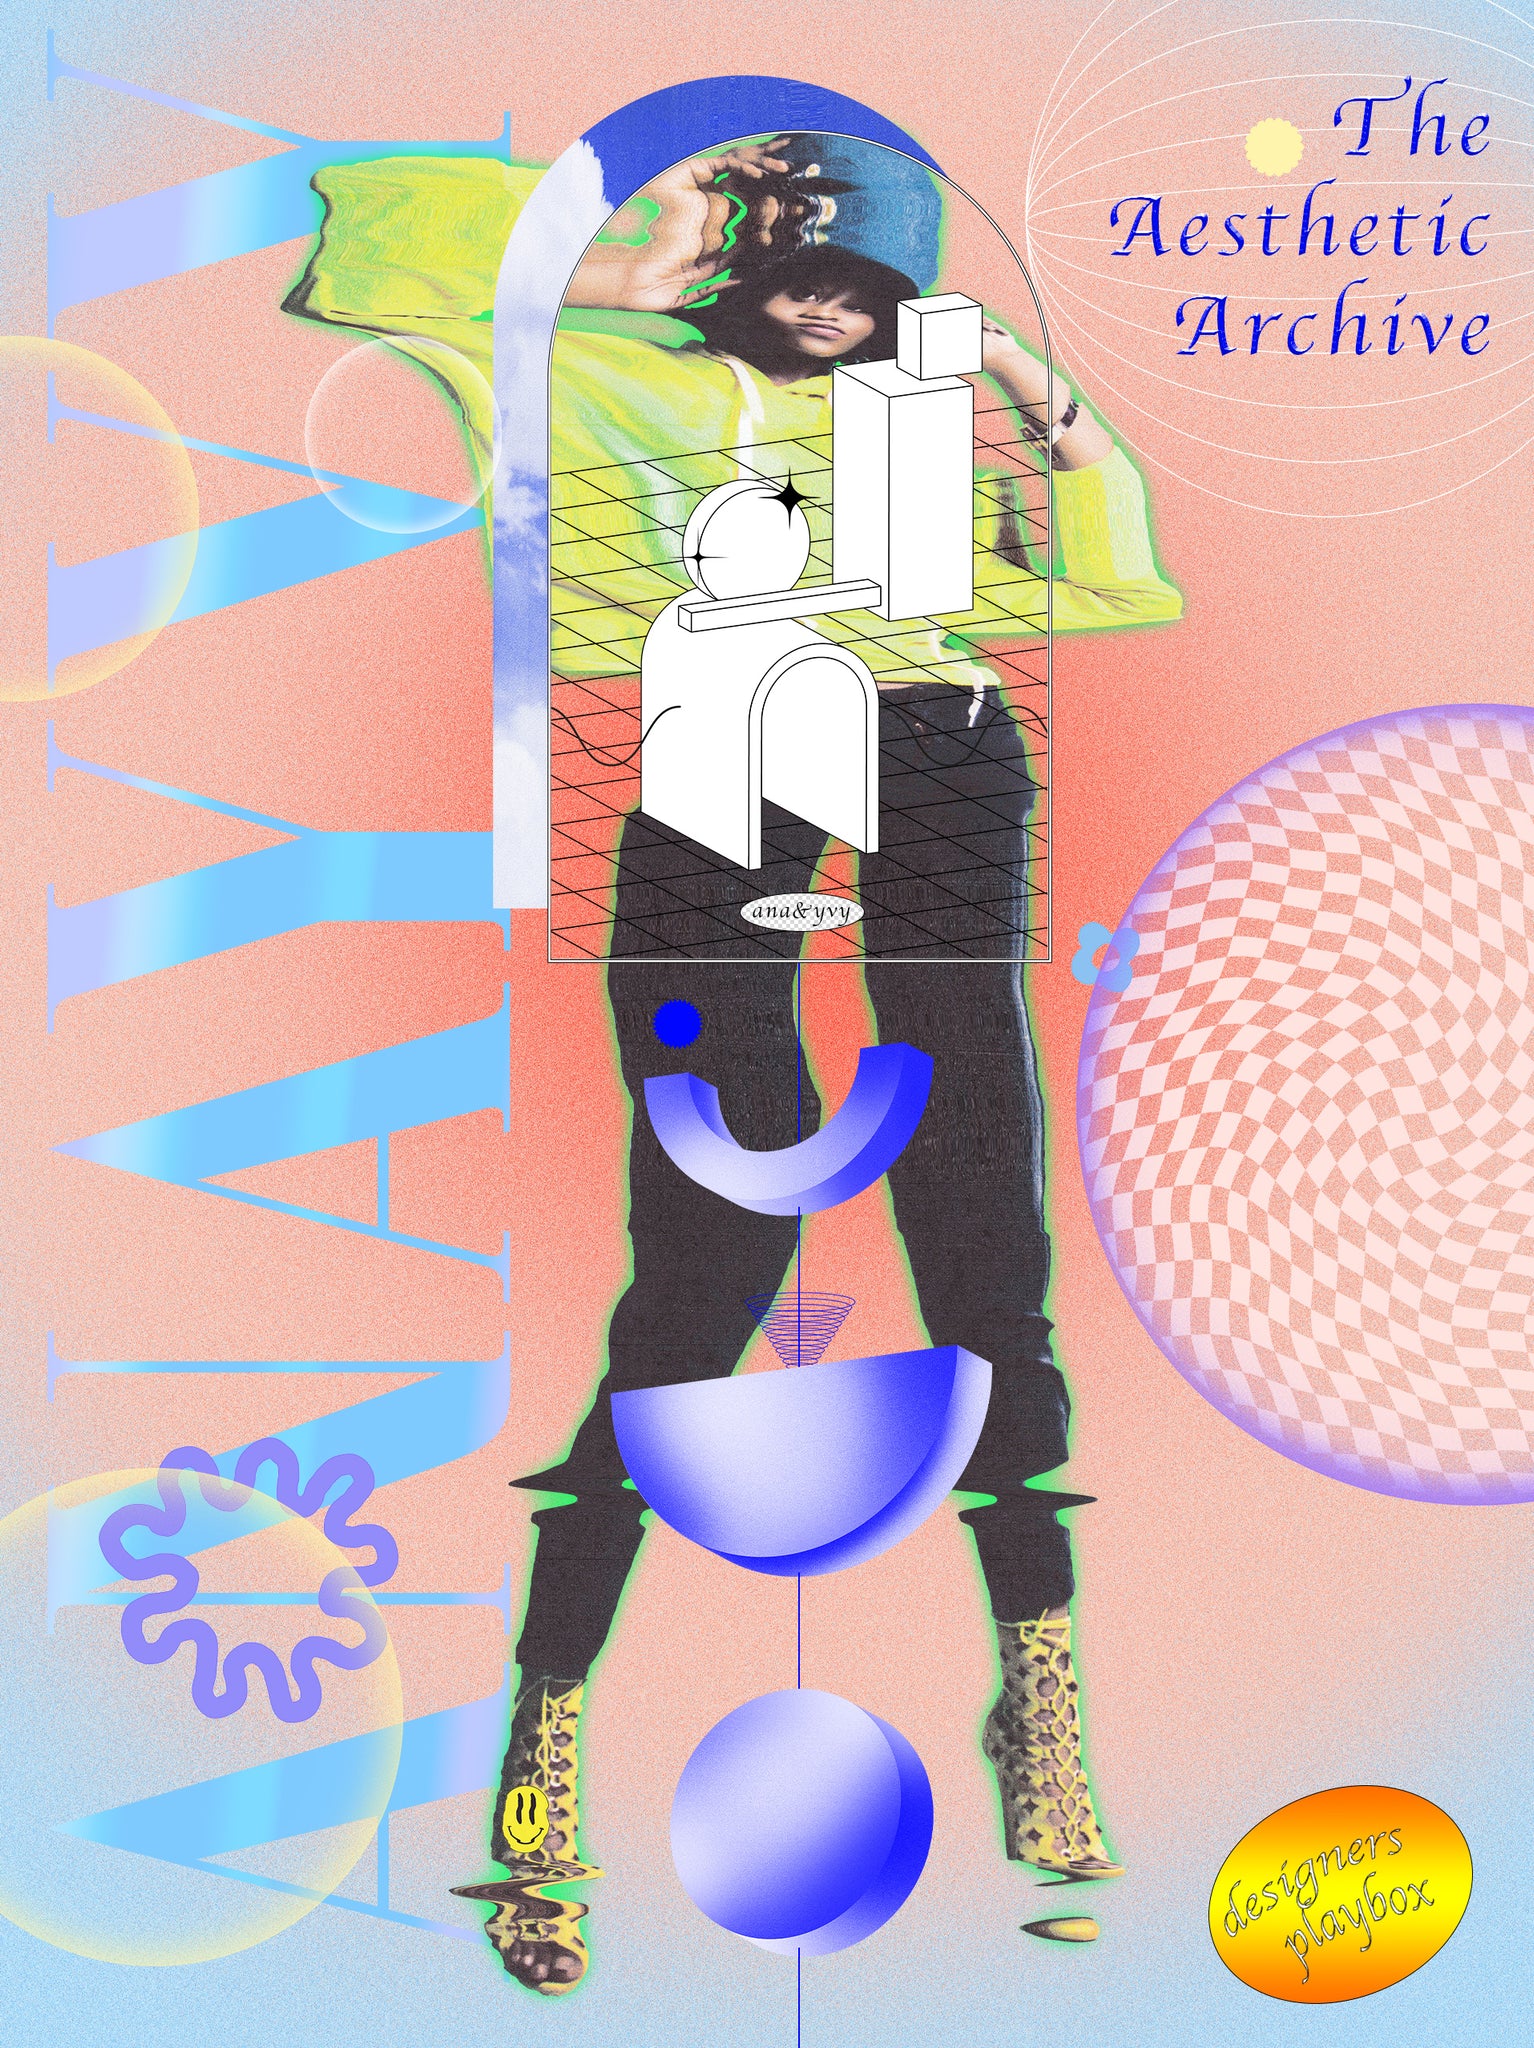 The Aesthetic Archive | 90s Clipart - ANA & YVY